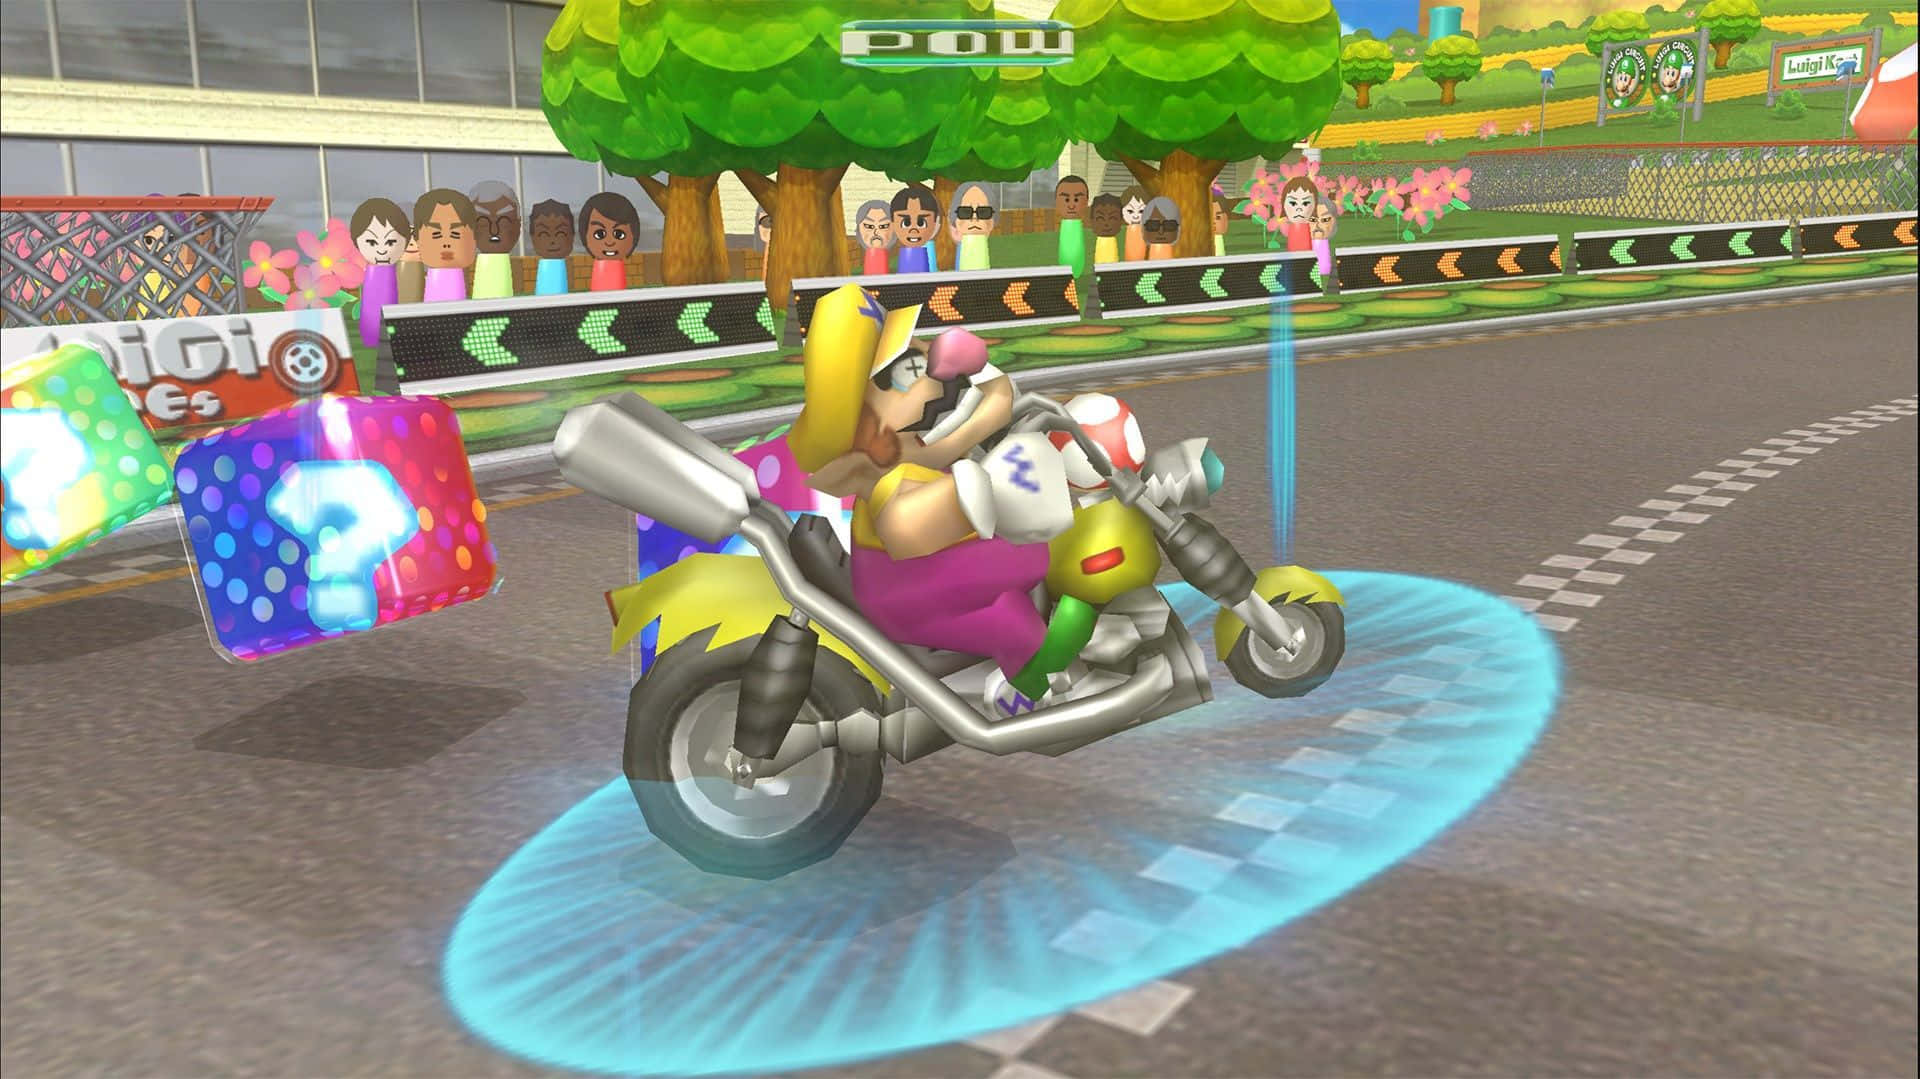 "Life is a race in Mario Kart!"